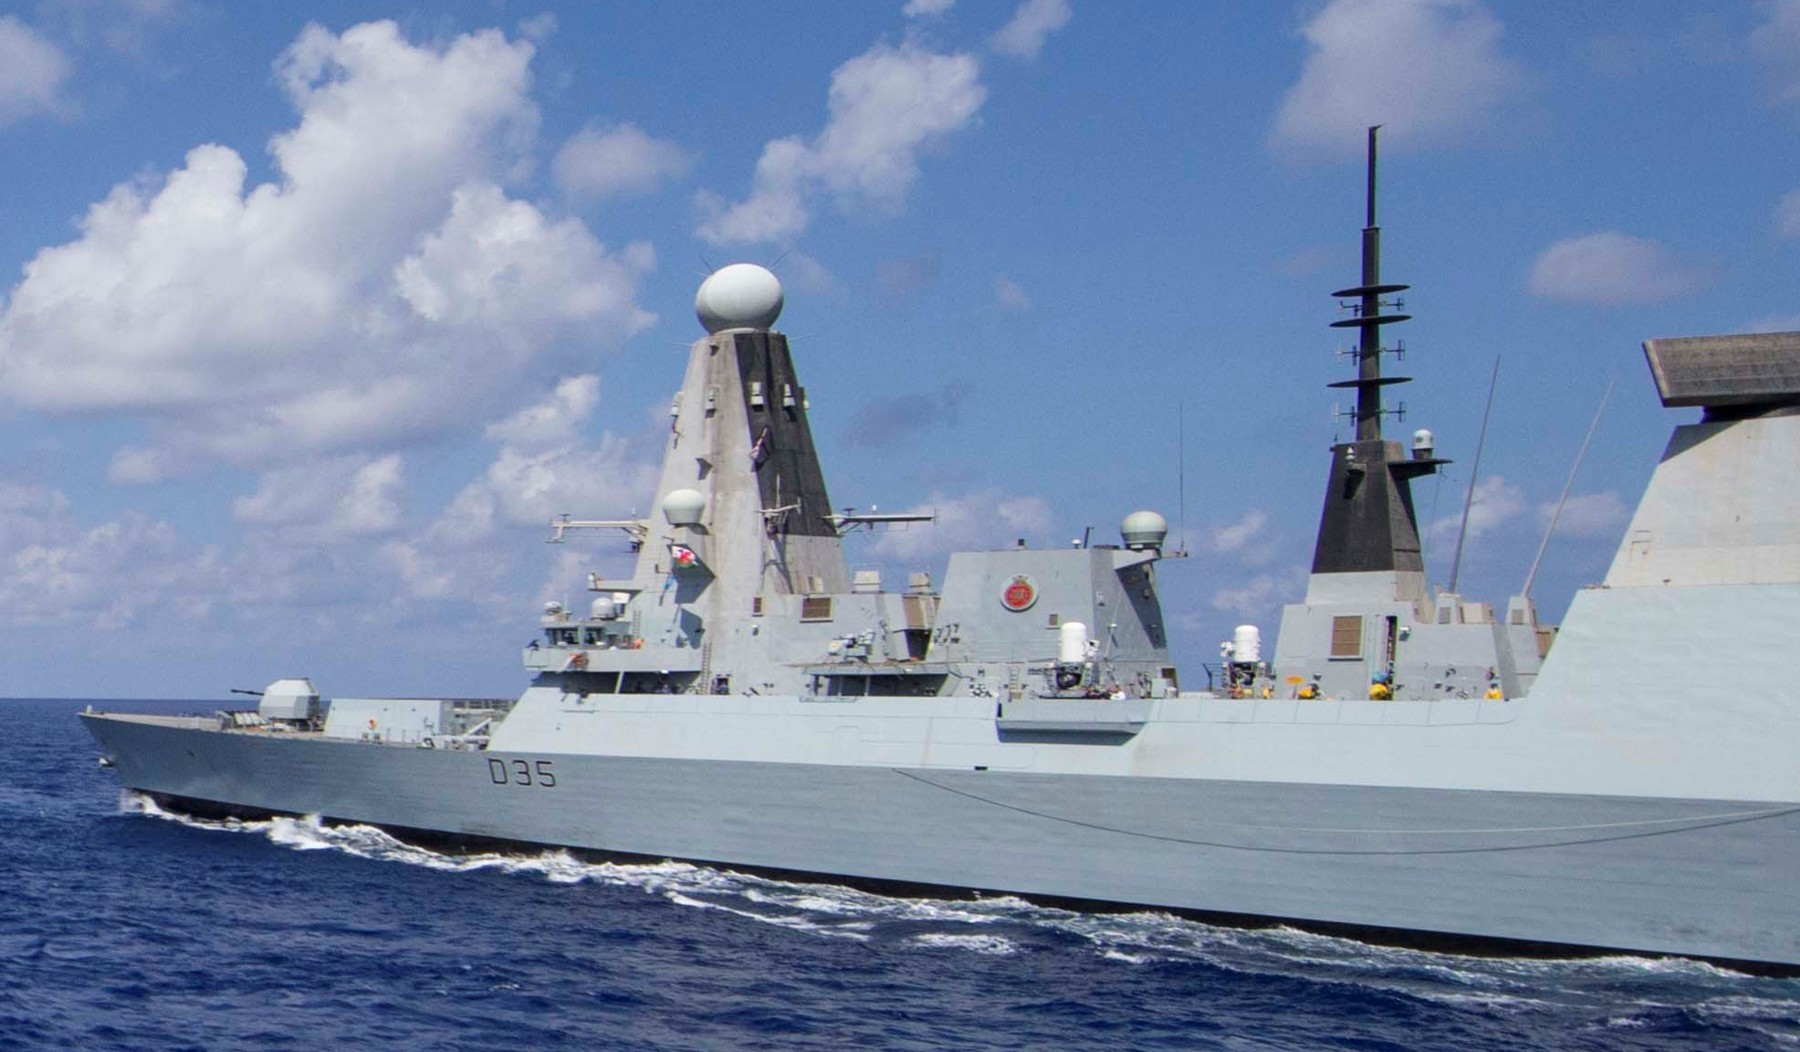 hms dragon d-35 type 45 daring class guided missile destroyer ddg royal navy sea viper paams 03